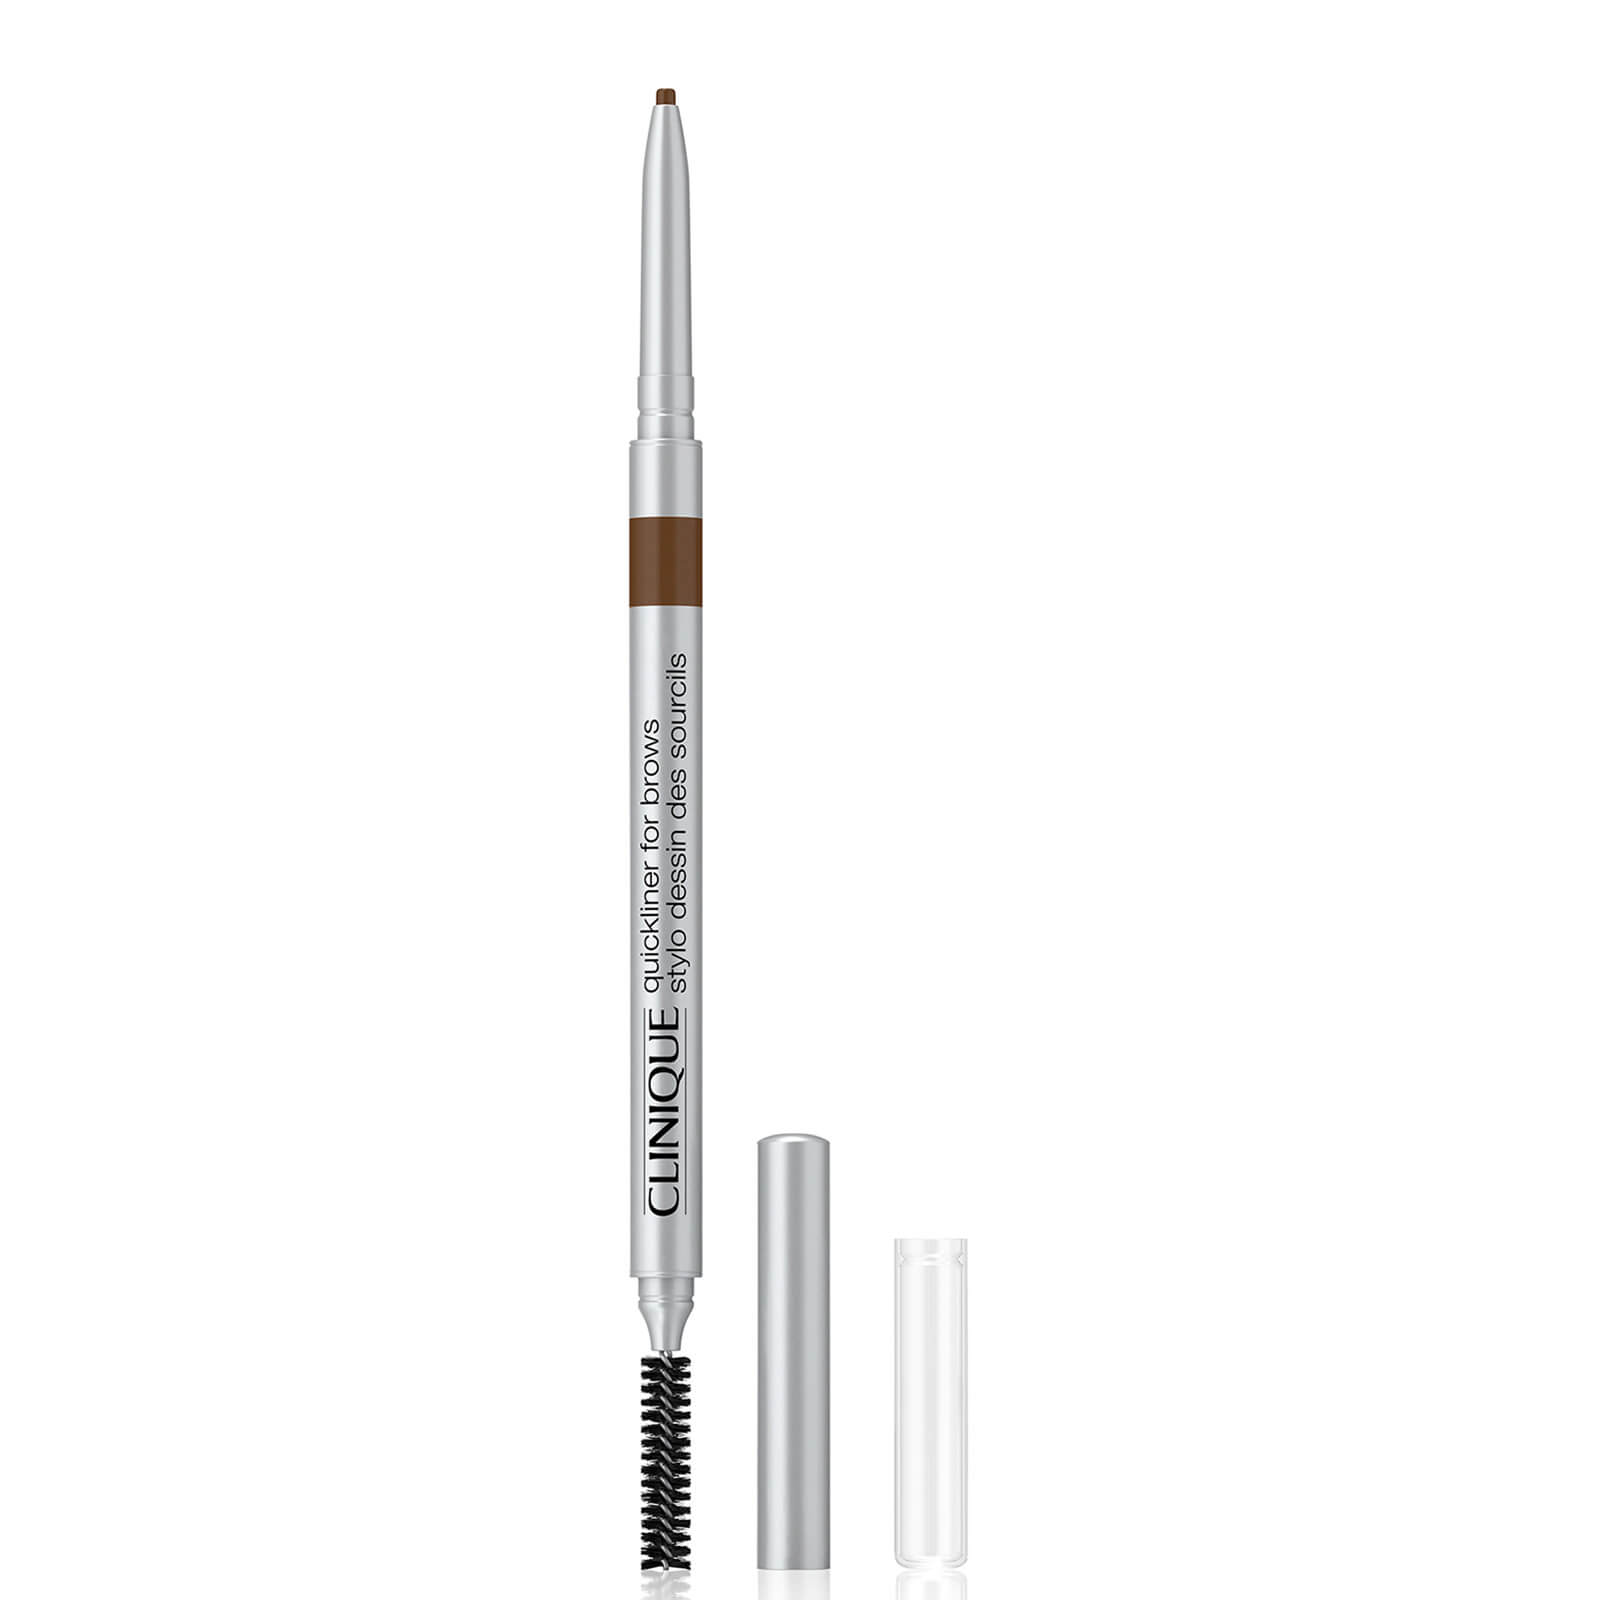 Photos - Eyeshadow Clinique Quickliner for Brows 0.06g  - Deep Brown V4N20400 (Various Shades)